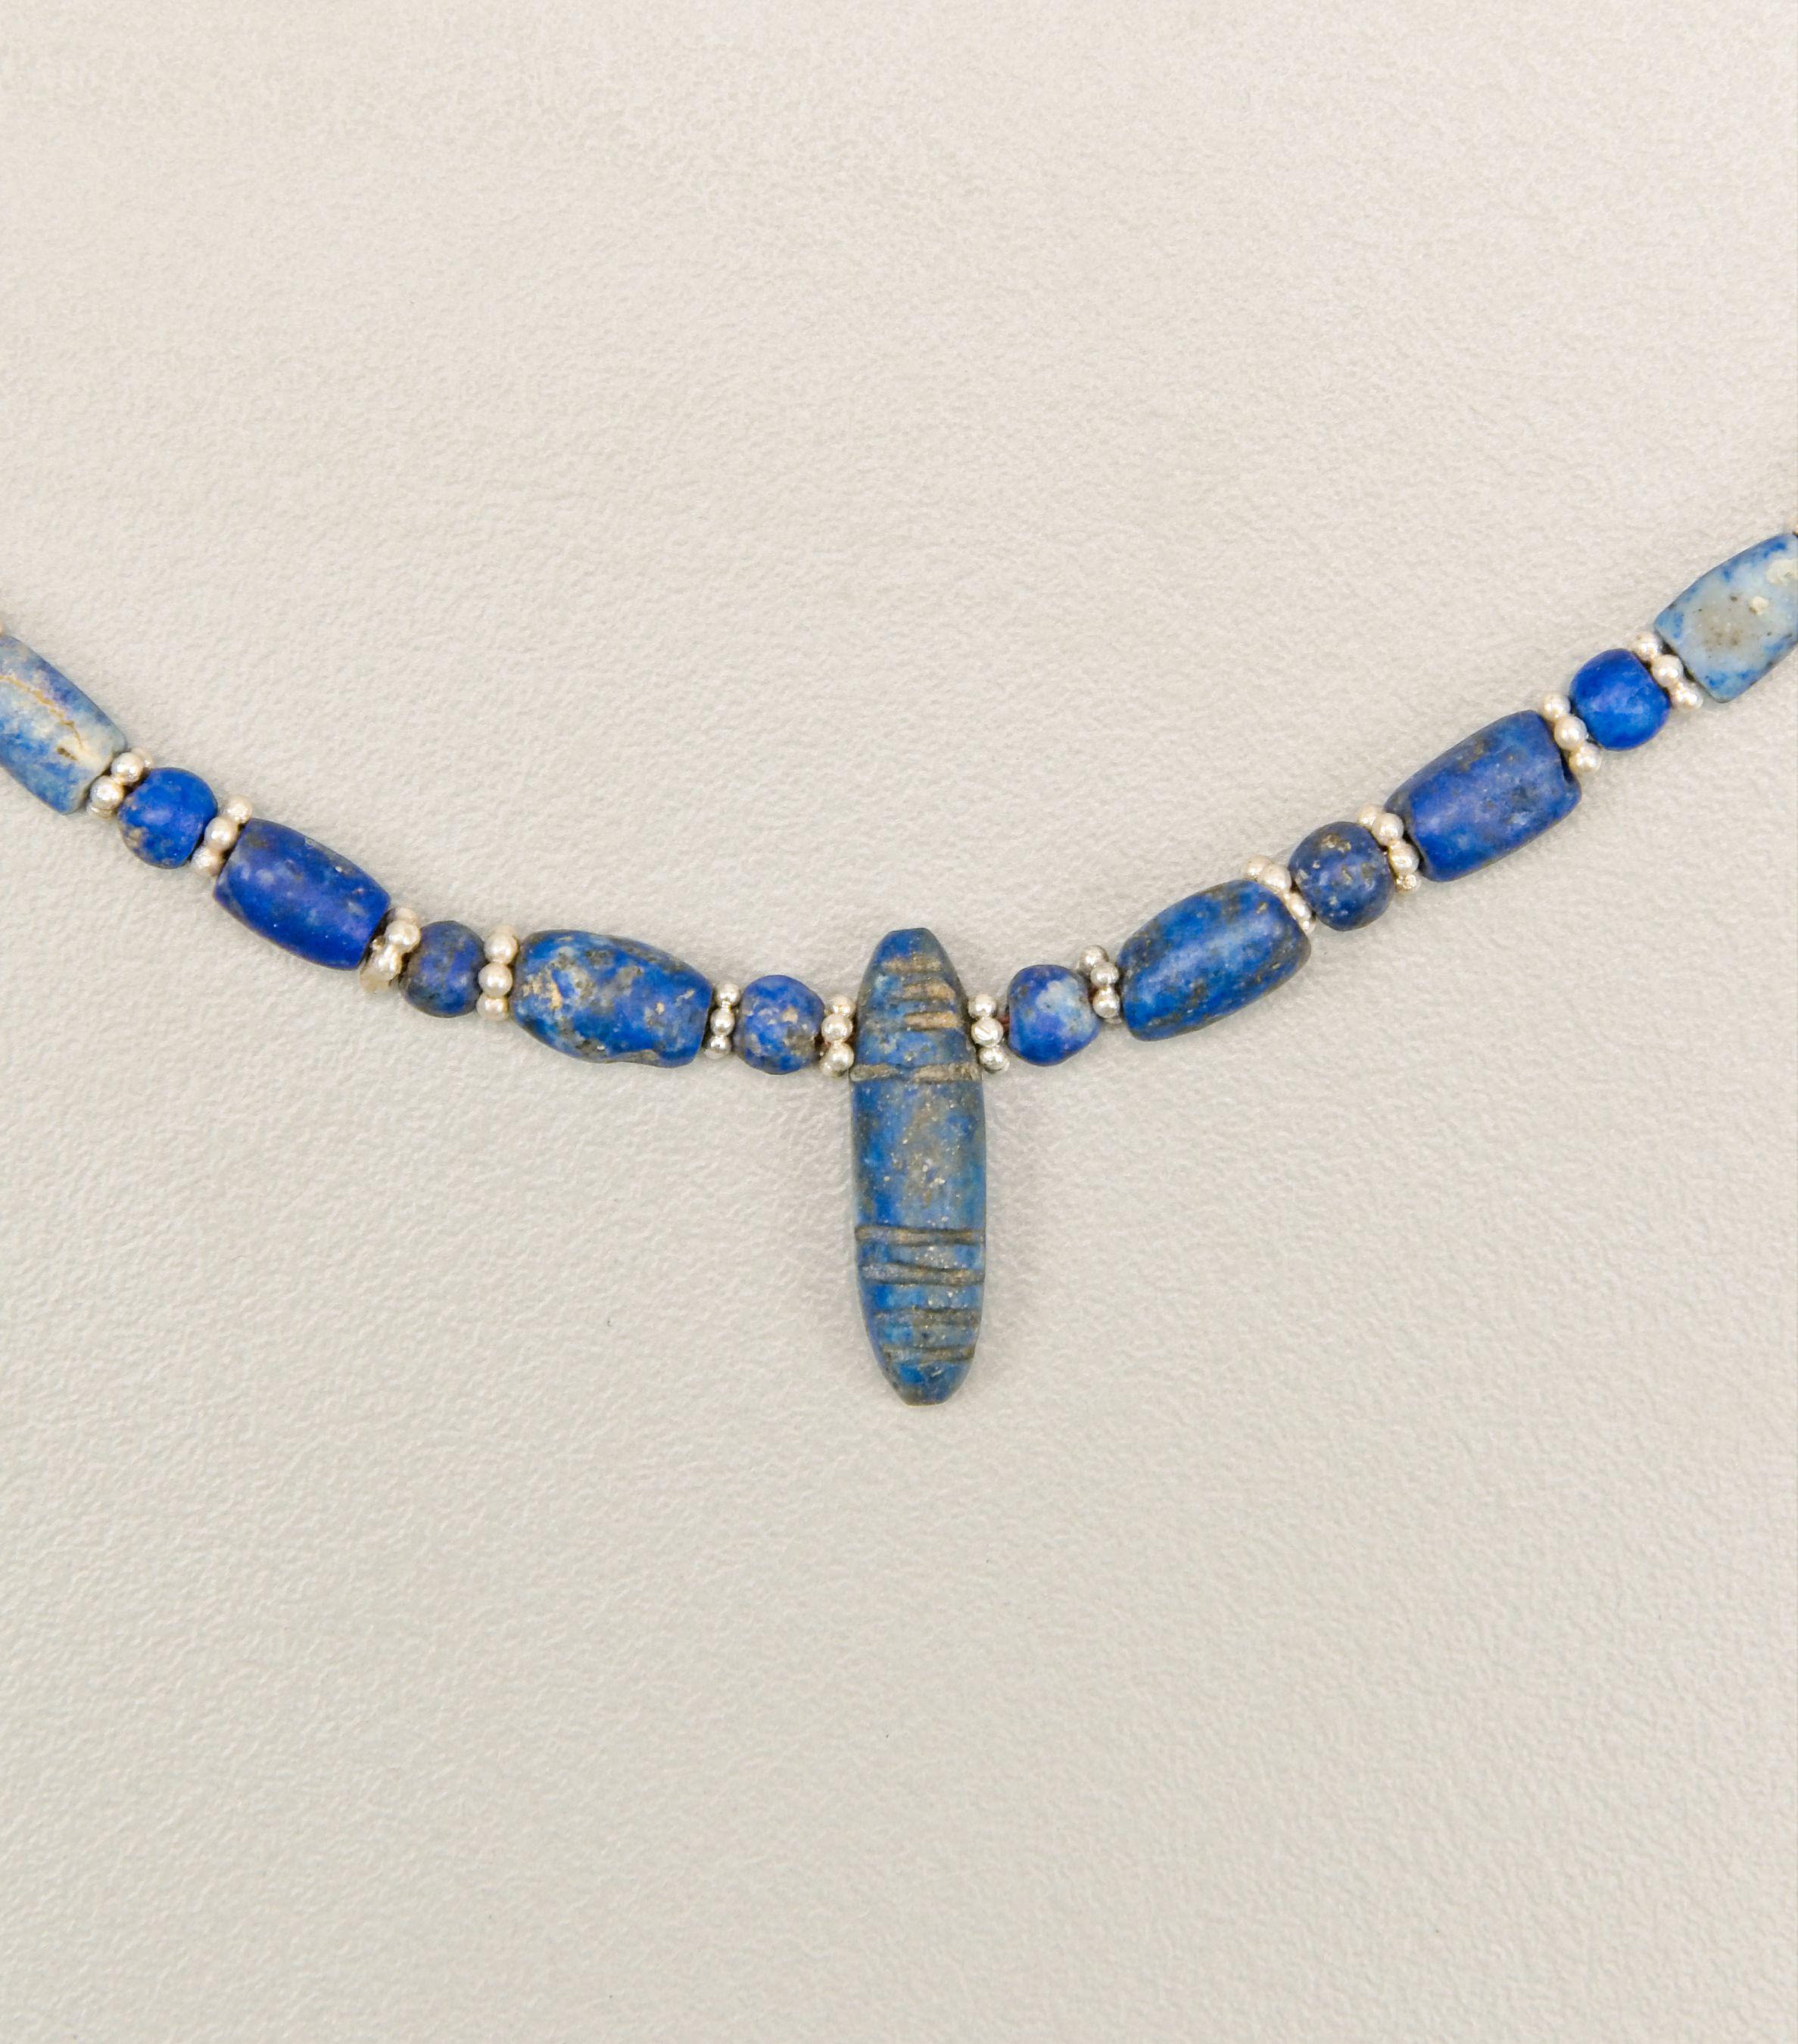 Seventy- five lapis lazuli beads with a center pendant bead. There are thirty-six barrel shaped beads and thirty-eight round beads each spaced by a silver ring bead. There are seventy-six of these silver beads which are composed of six grains that